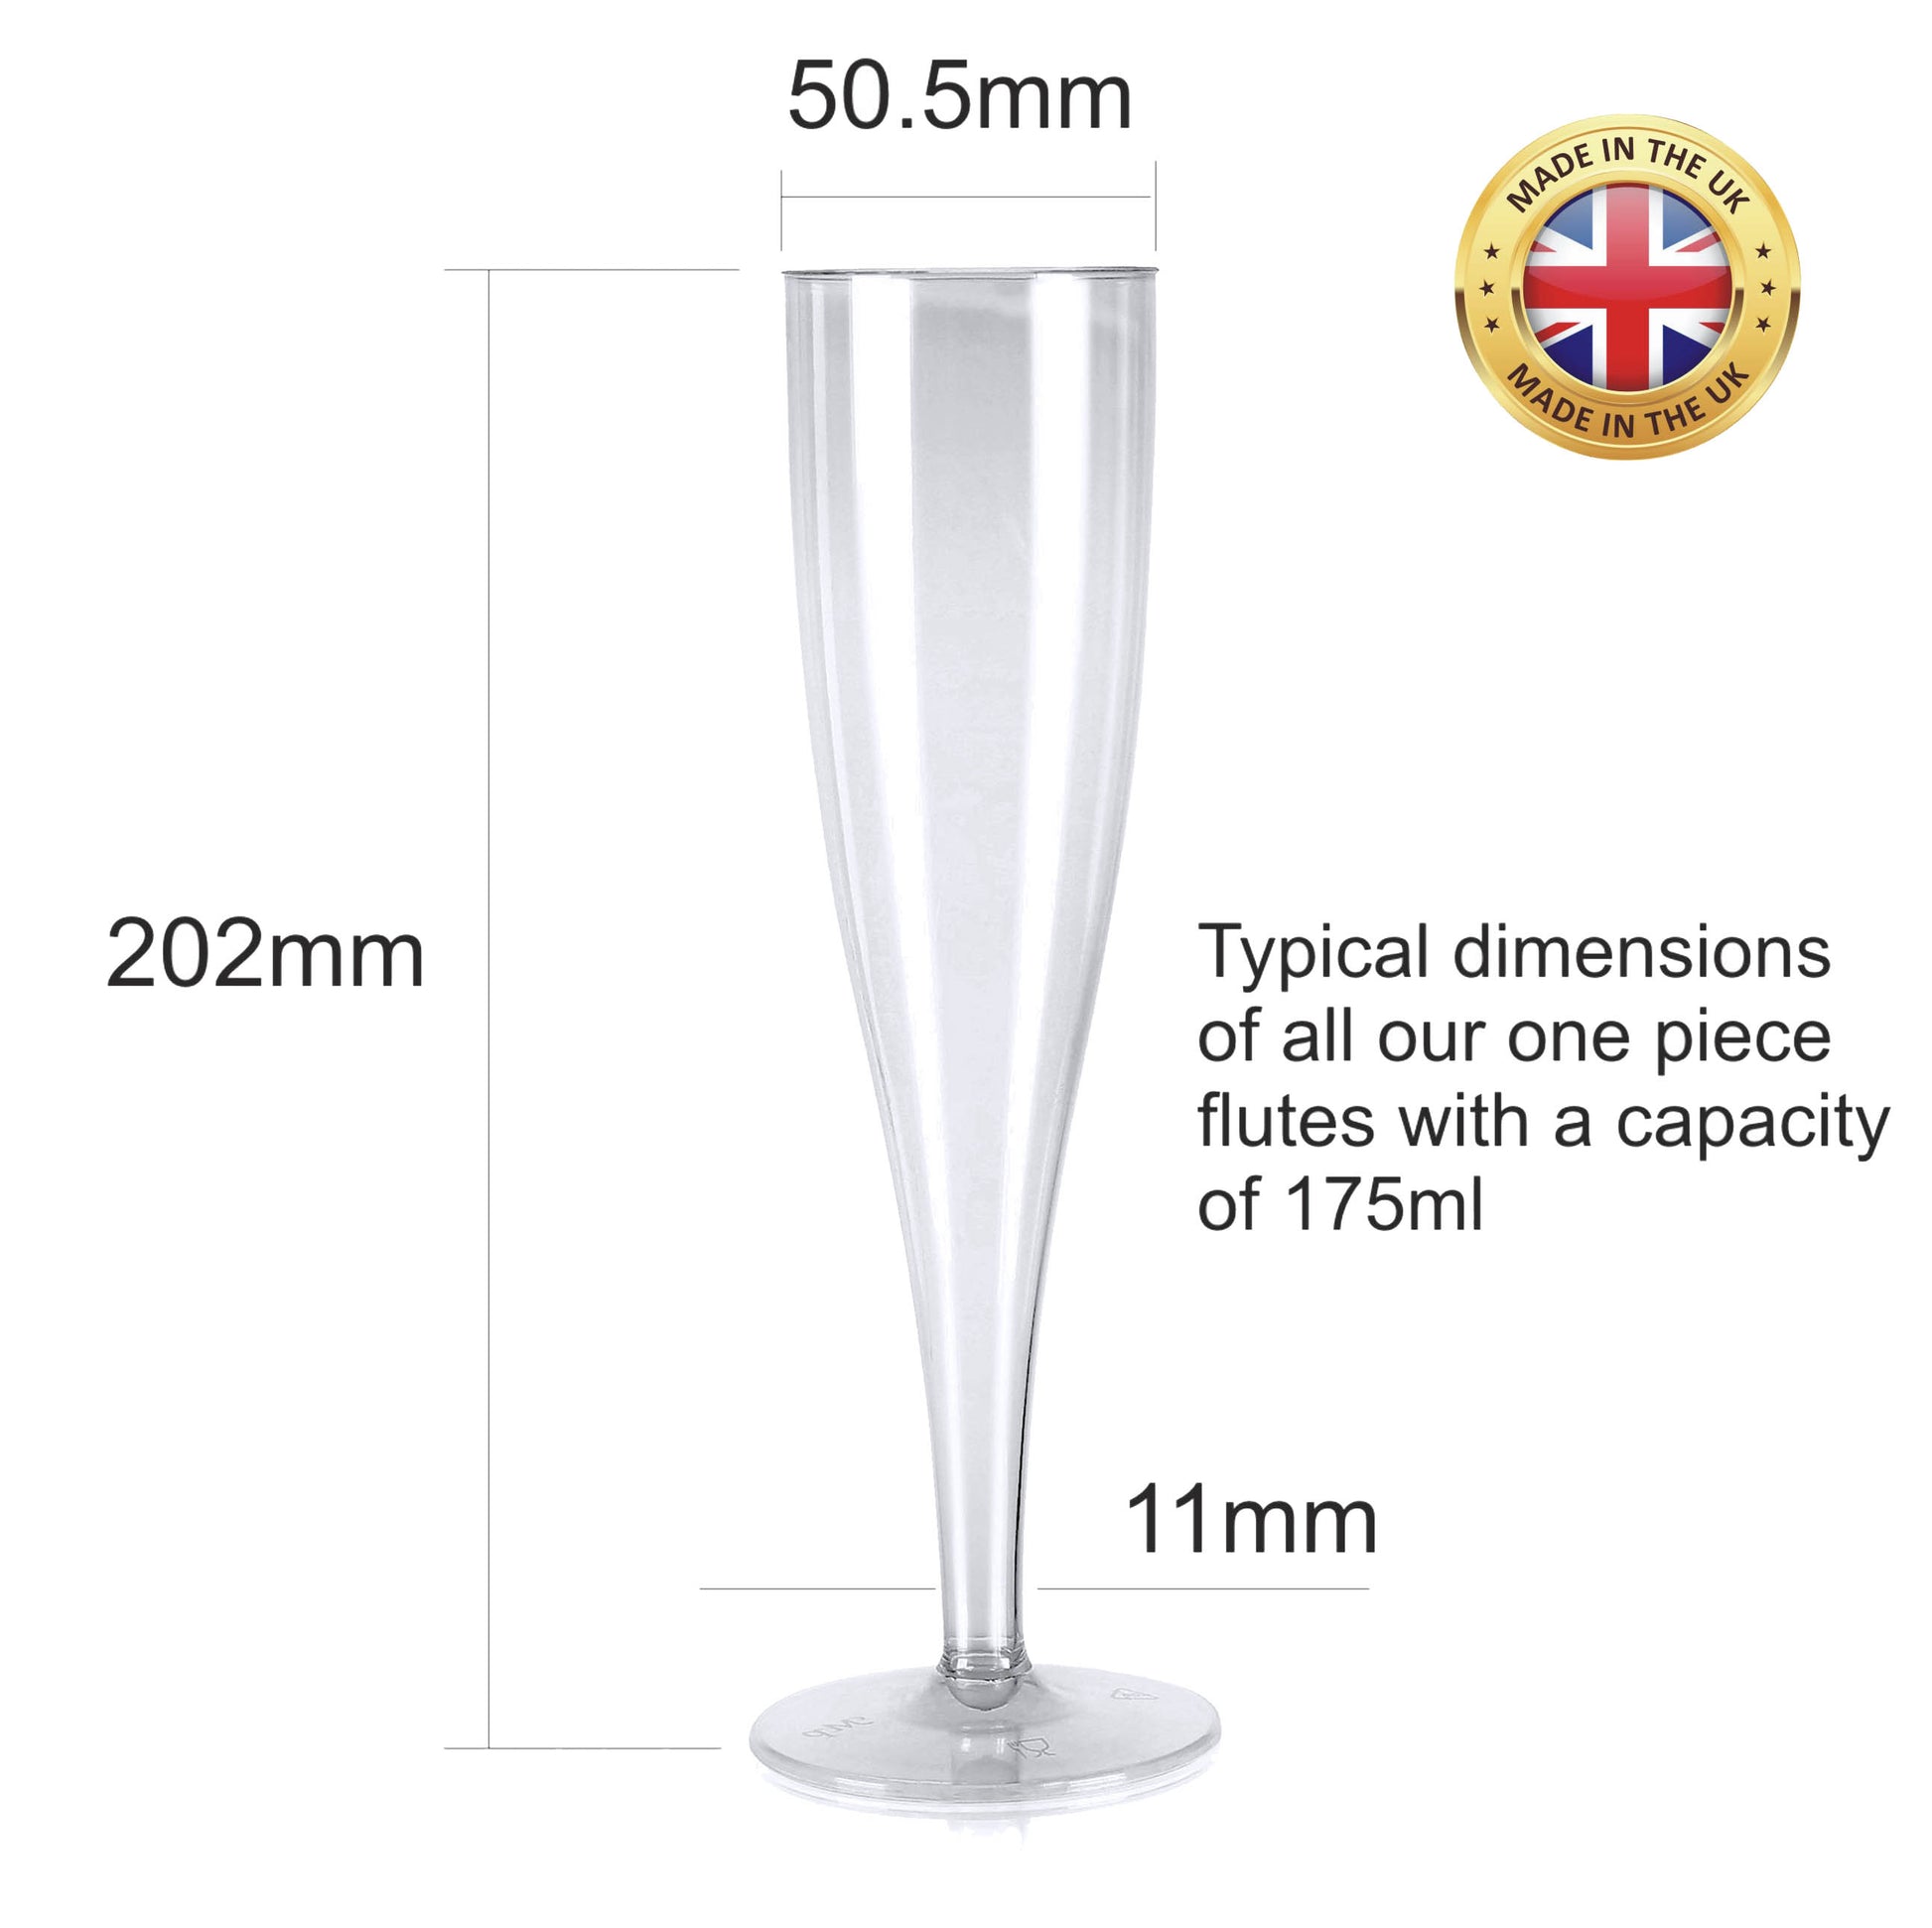 100 x Clear Prosecco Flutes 175ml 6oz Capacity Recyclable Polystyrene Material Transparent 1-Piece Sturdy Champagne Glasses BBQs Picnics-5056020107095-PCUP-CHAMPx10-Product Pro-Champagne Glasses, Clear Champagne Glasses, Plastic Flutes, Prosecco Flutes, Transparent